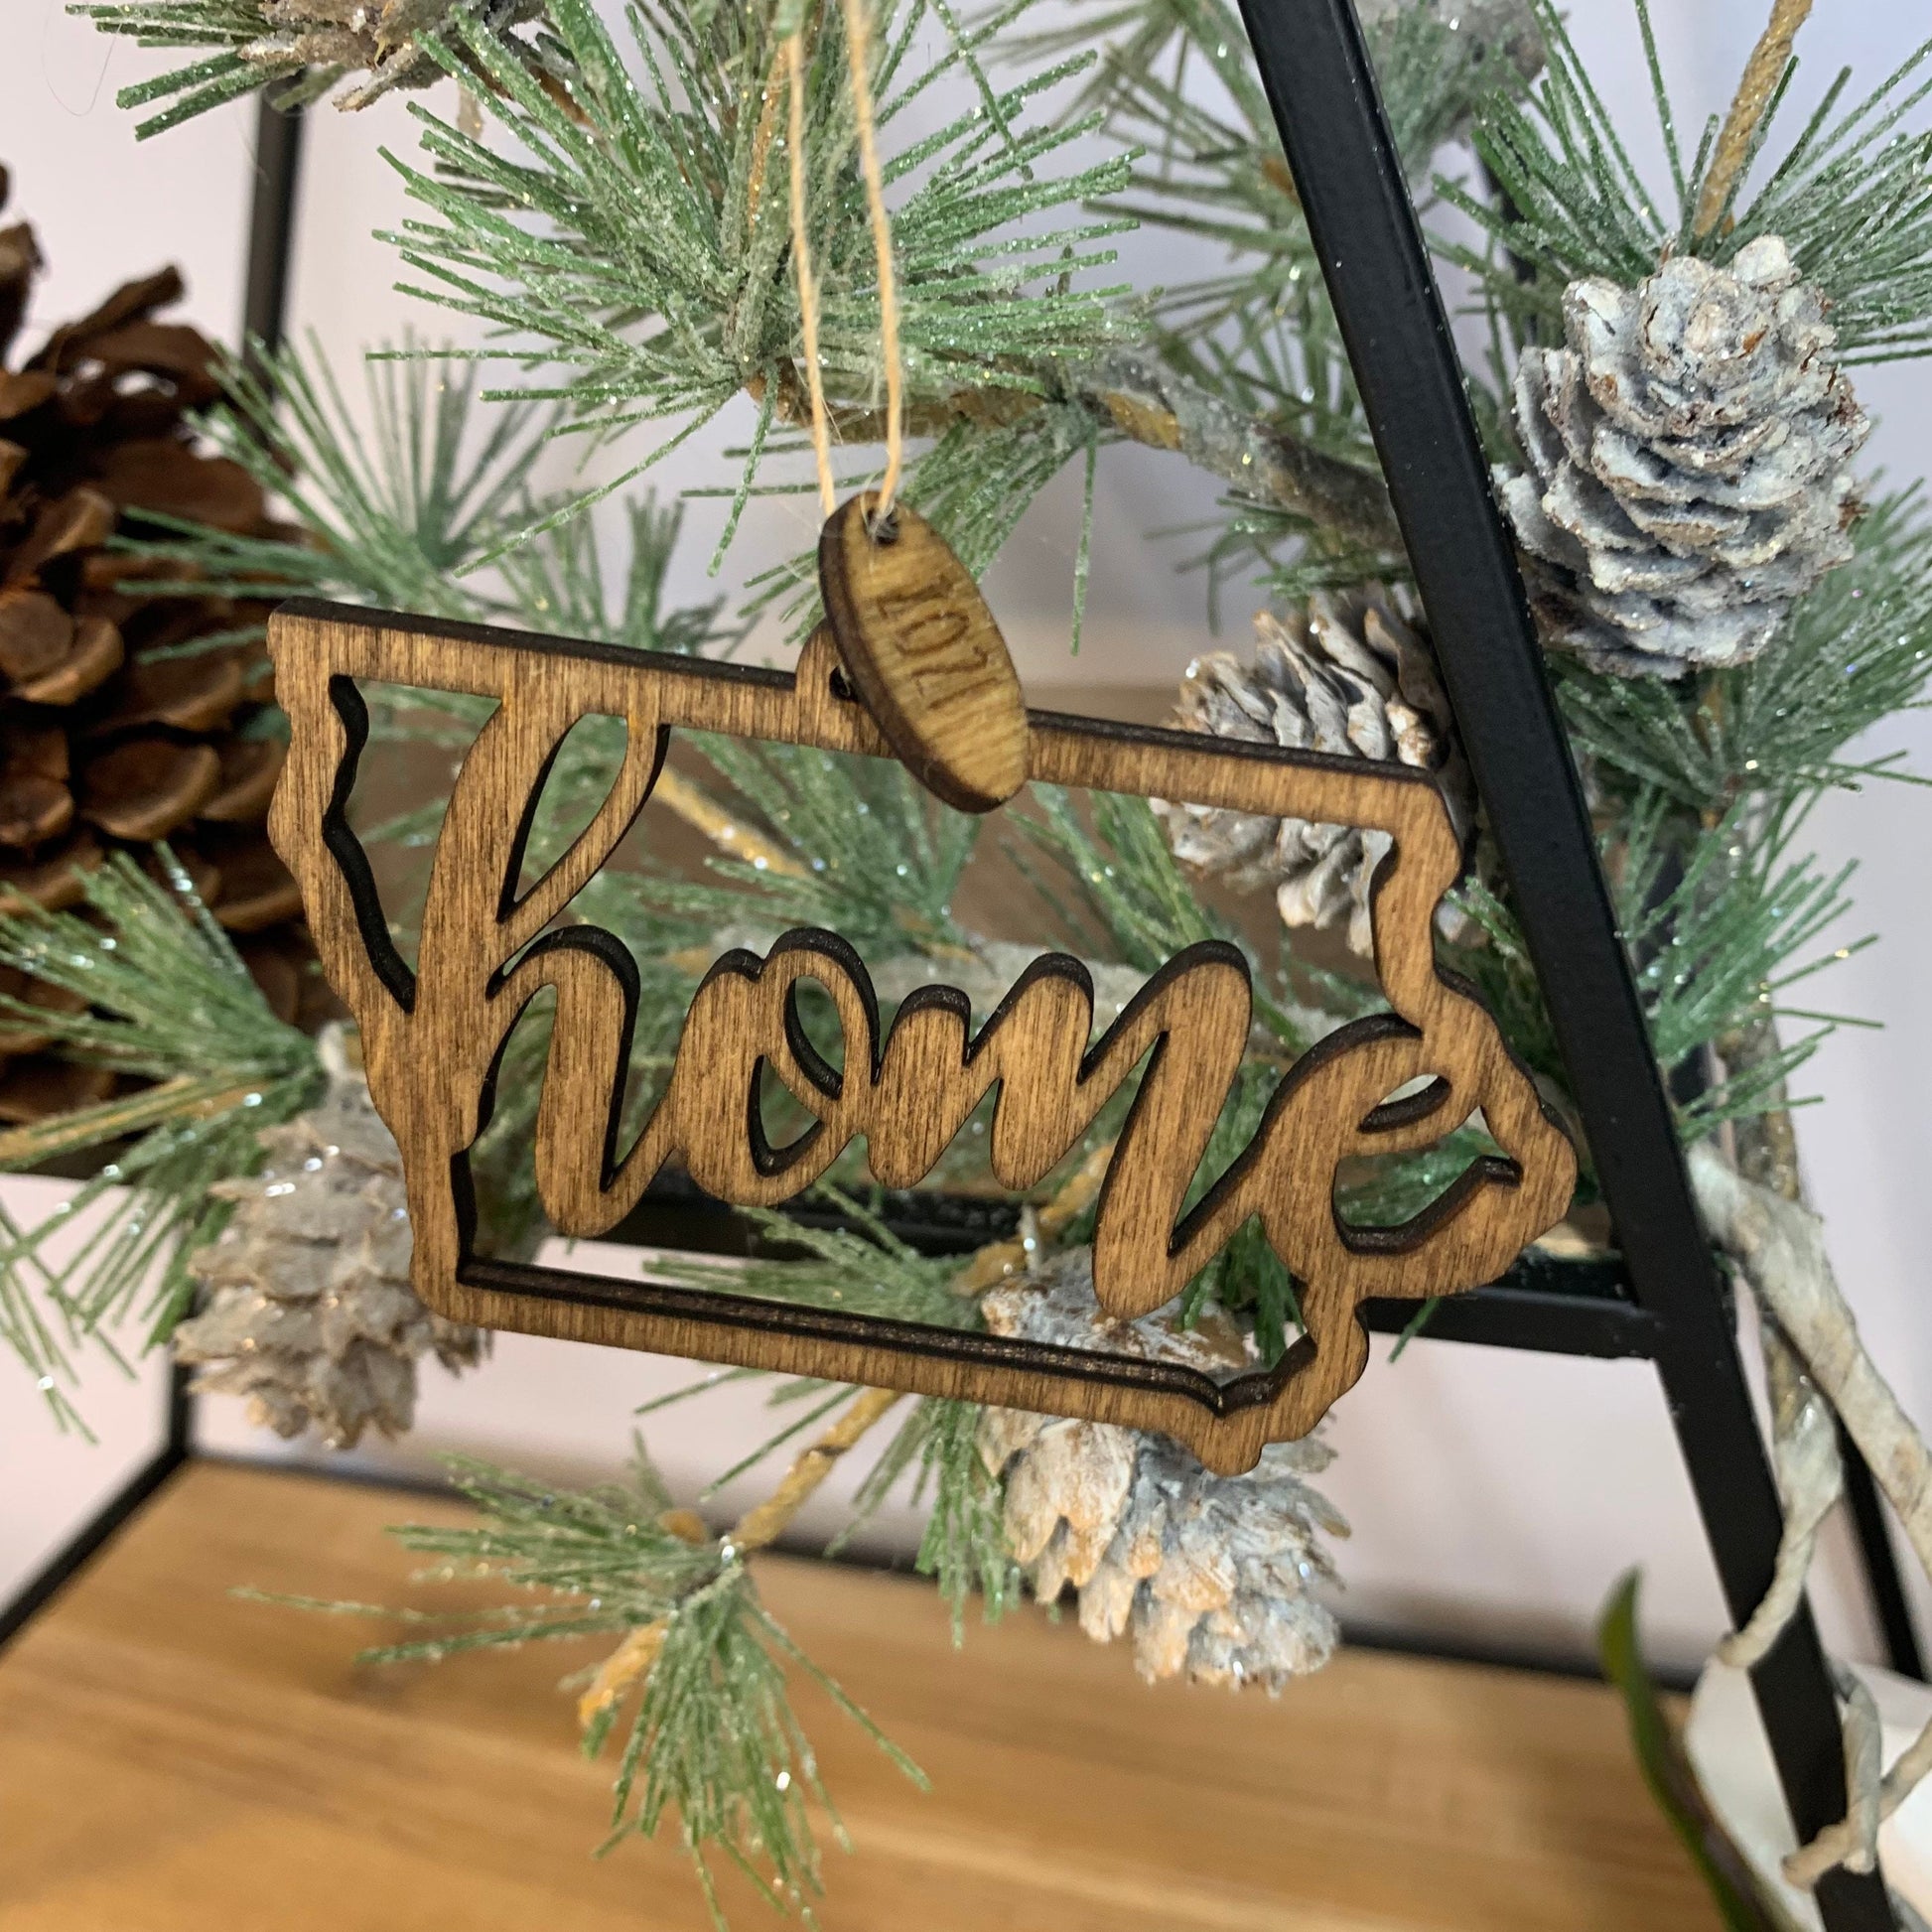 Laser Cut Wood "Home" Iowa State Shaped Ornaments - With 2021 Charm - unfinished or Stained wood finish